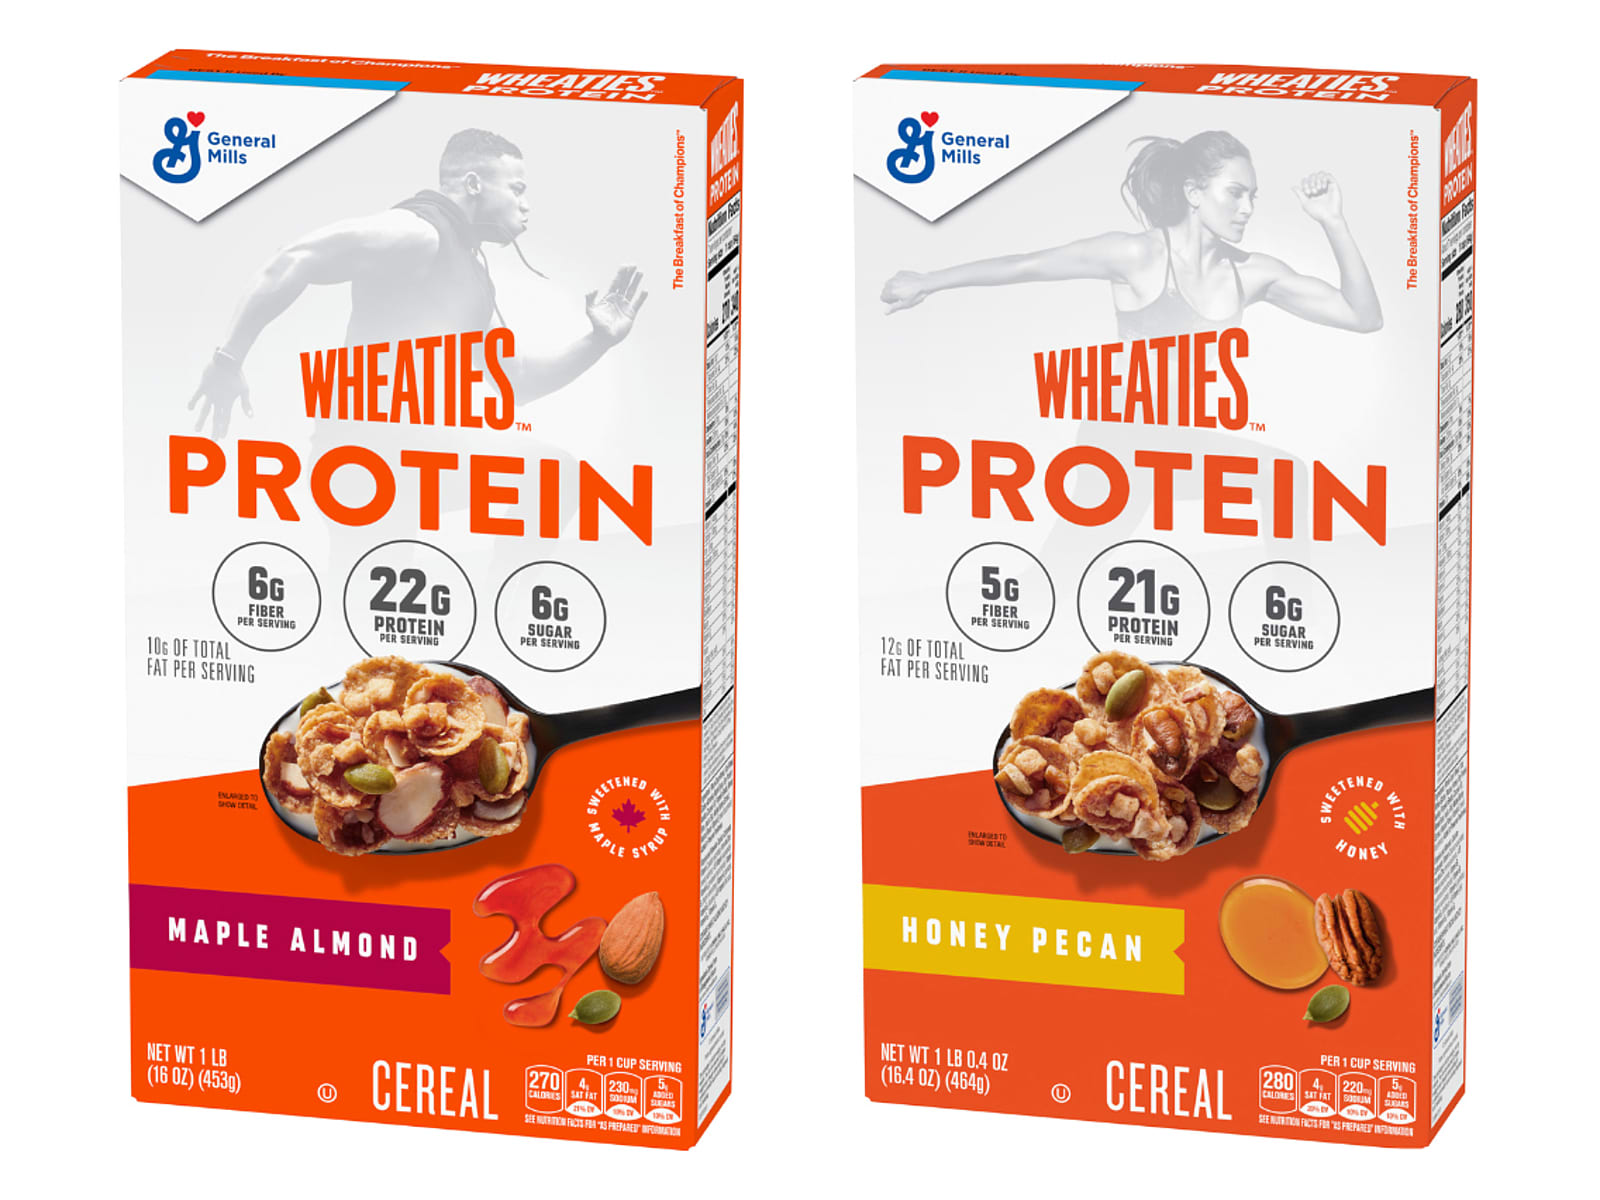 Wheaties Protein packs more than 20 grams of protein in every serving and is available in Maple Almond and Honey Pecan.